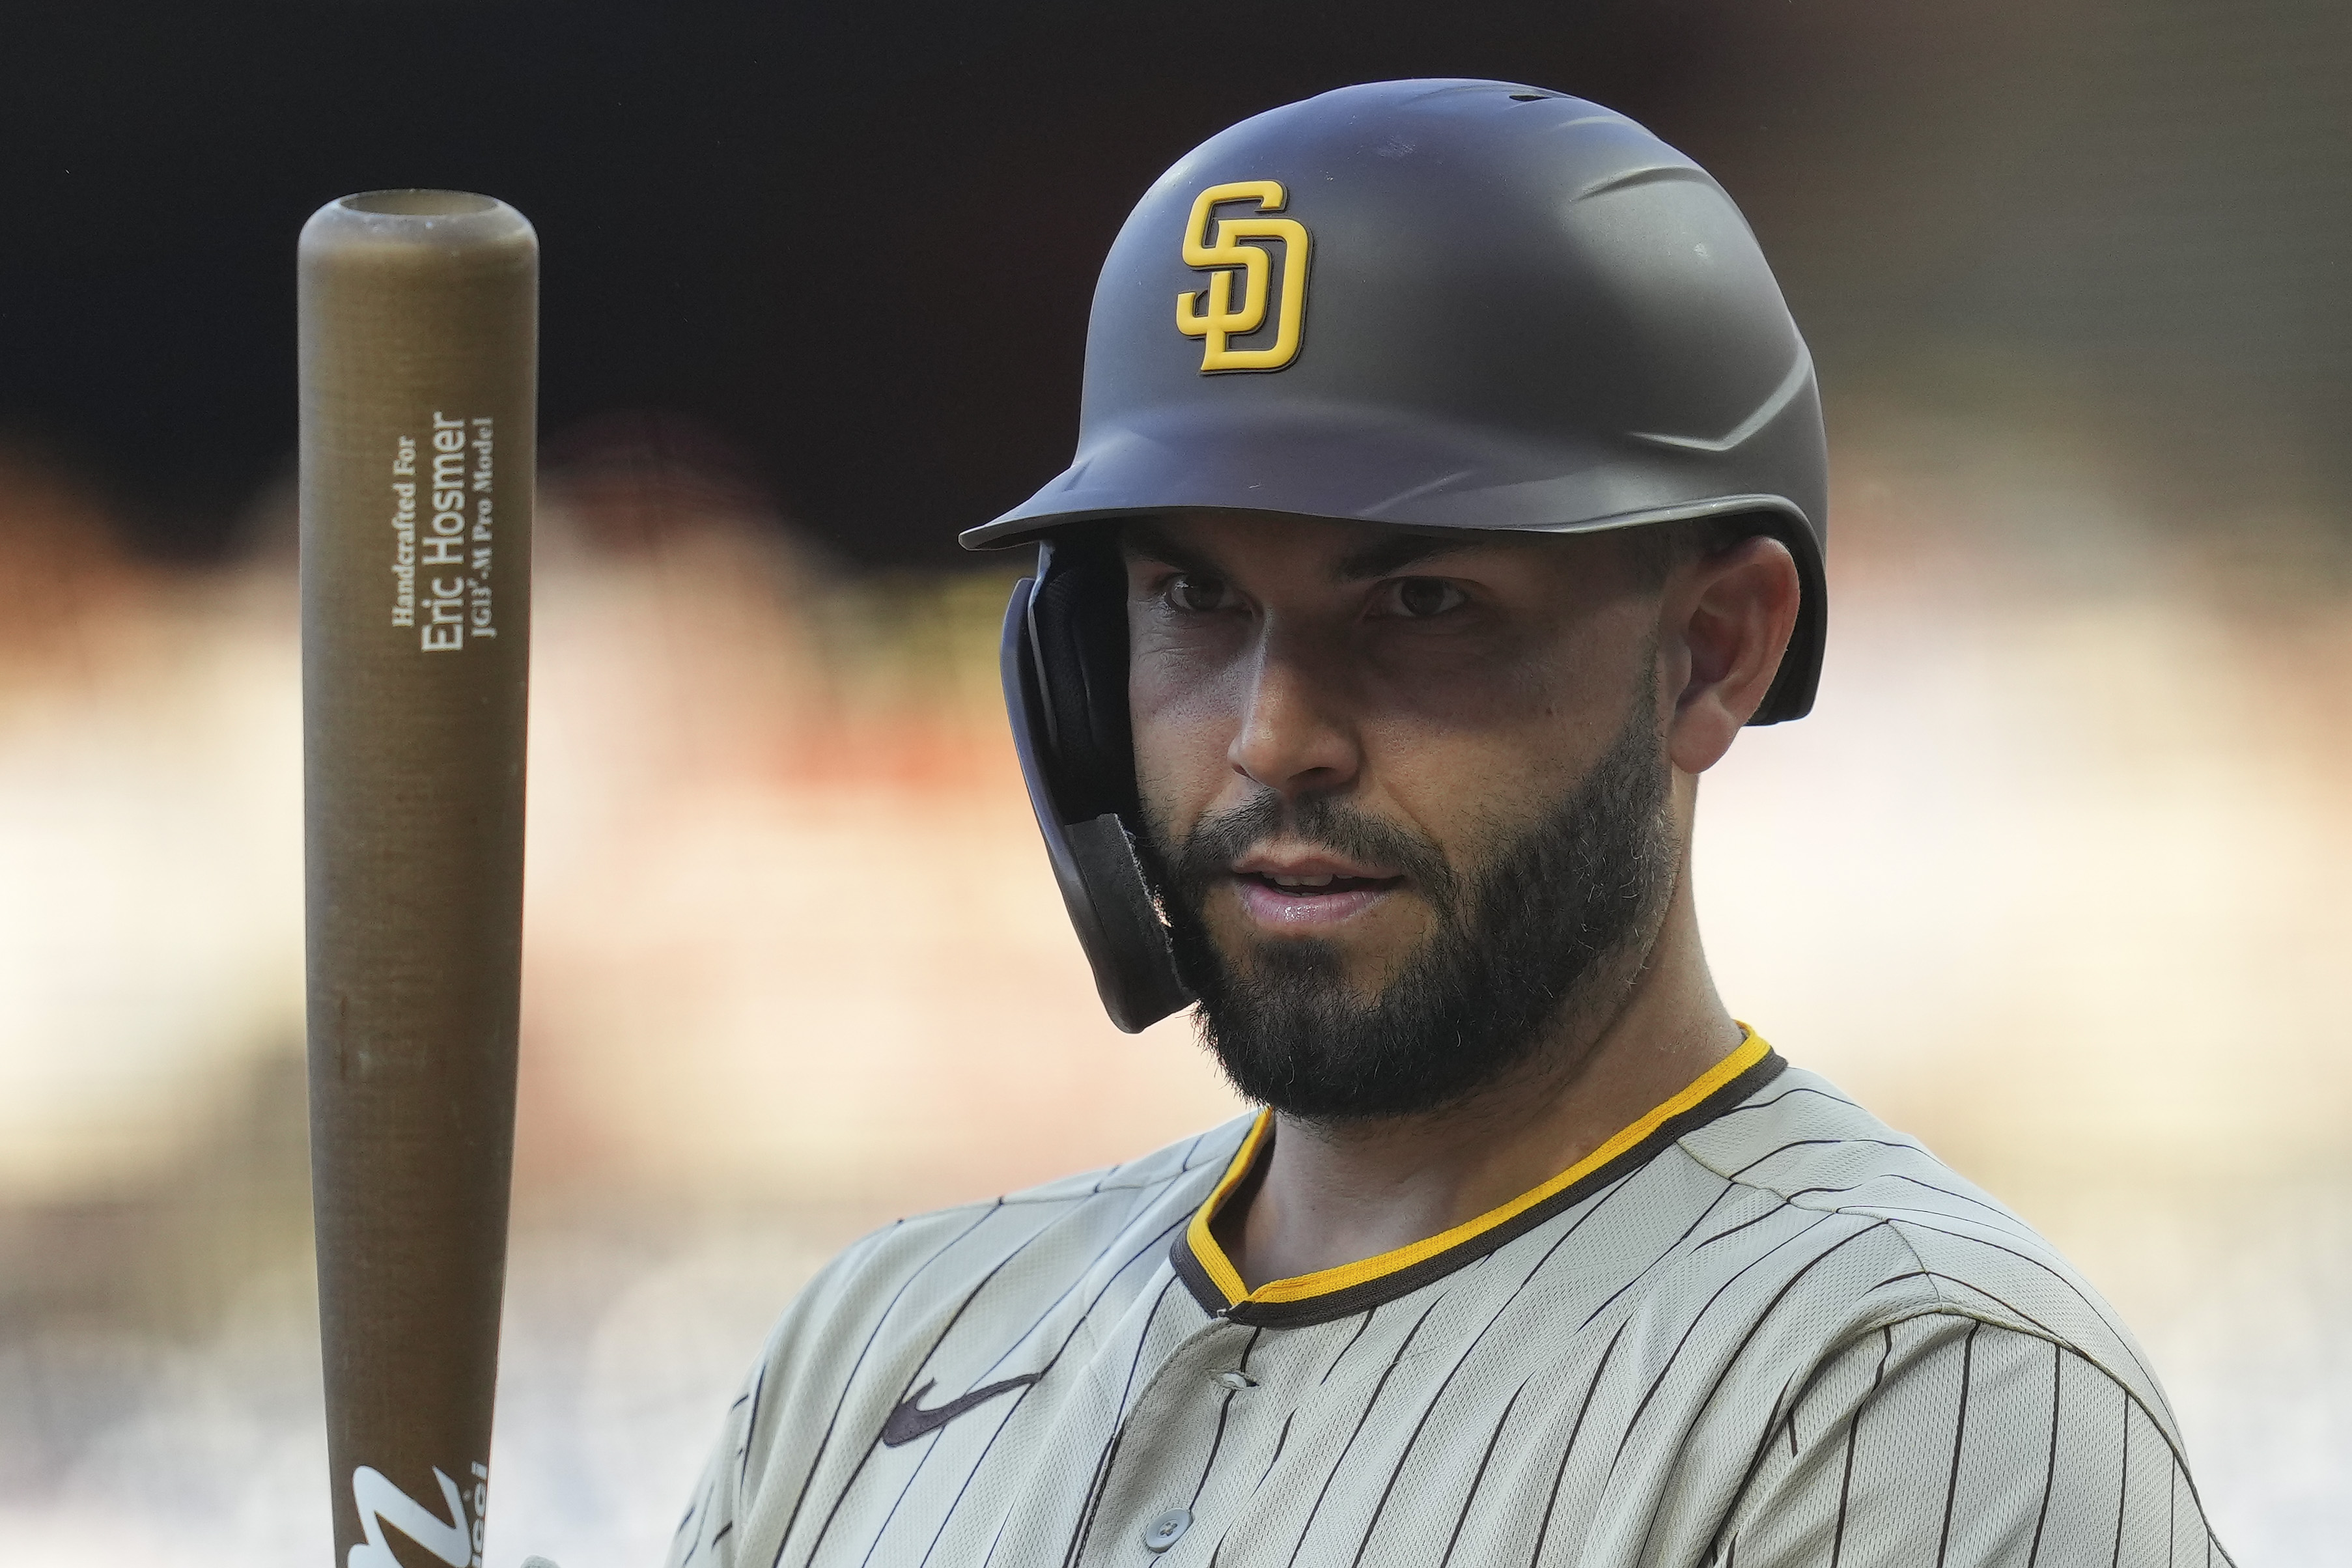 Padres are first MLB team to reach uniform ad deal, with Motorola